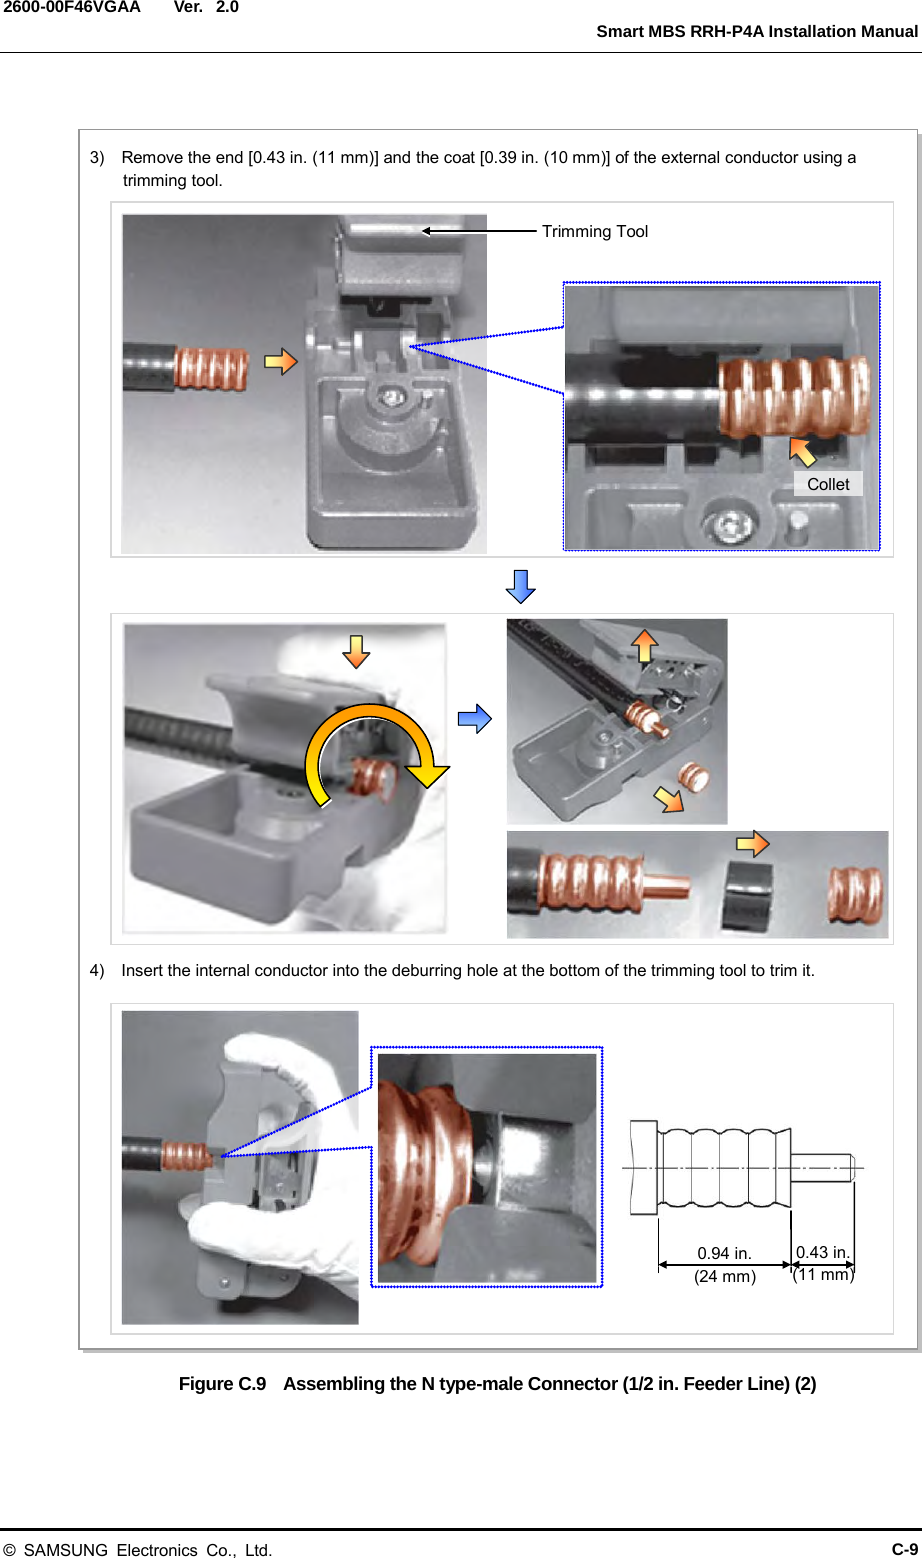  Ver.   Smart MBS RRH-P4A Installation Manual 2600-00F46VGAA 2.0  Figure C.9  Assembling the N type-male Connector (1/2 in. Feeder Line) (2)   Trimming Tool 3)   Remove the end [0.43 in. (11 mm)] and the coat [0.39 in. (10 mm)] of the external conductor using a trimming tool. Collet 4)   Insert the internal conductor into the deburring hole at the bottom of the trimming tool to trim it. 0.94 in. (24 mm)  0.43 in. (11 mm) © SAMSUNG Electronics Co., Ltd. C-9 